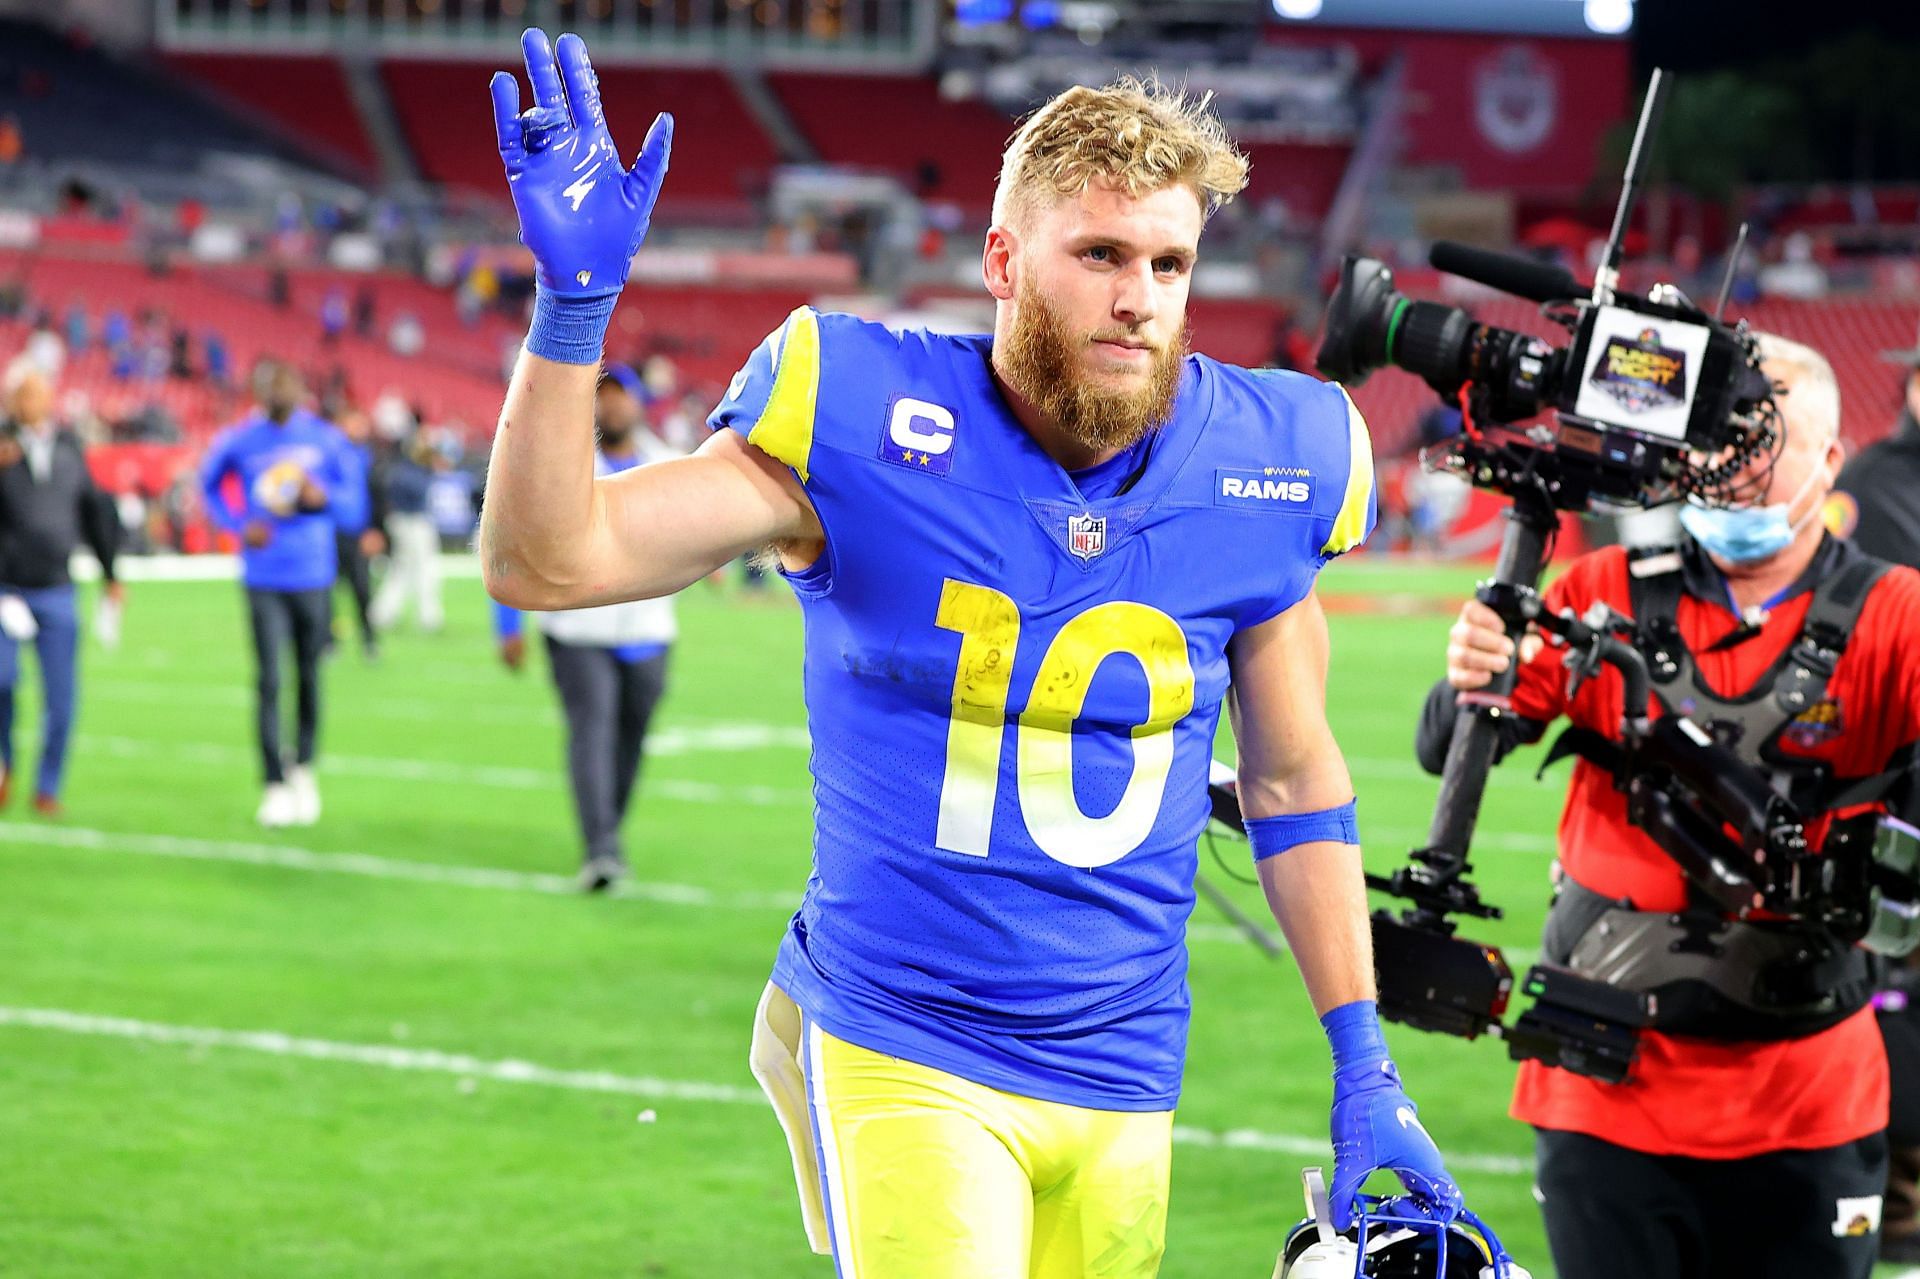 Cooper Kupp of the Los Angeles Rams